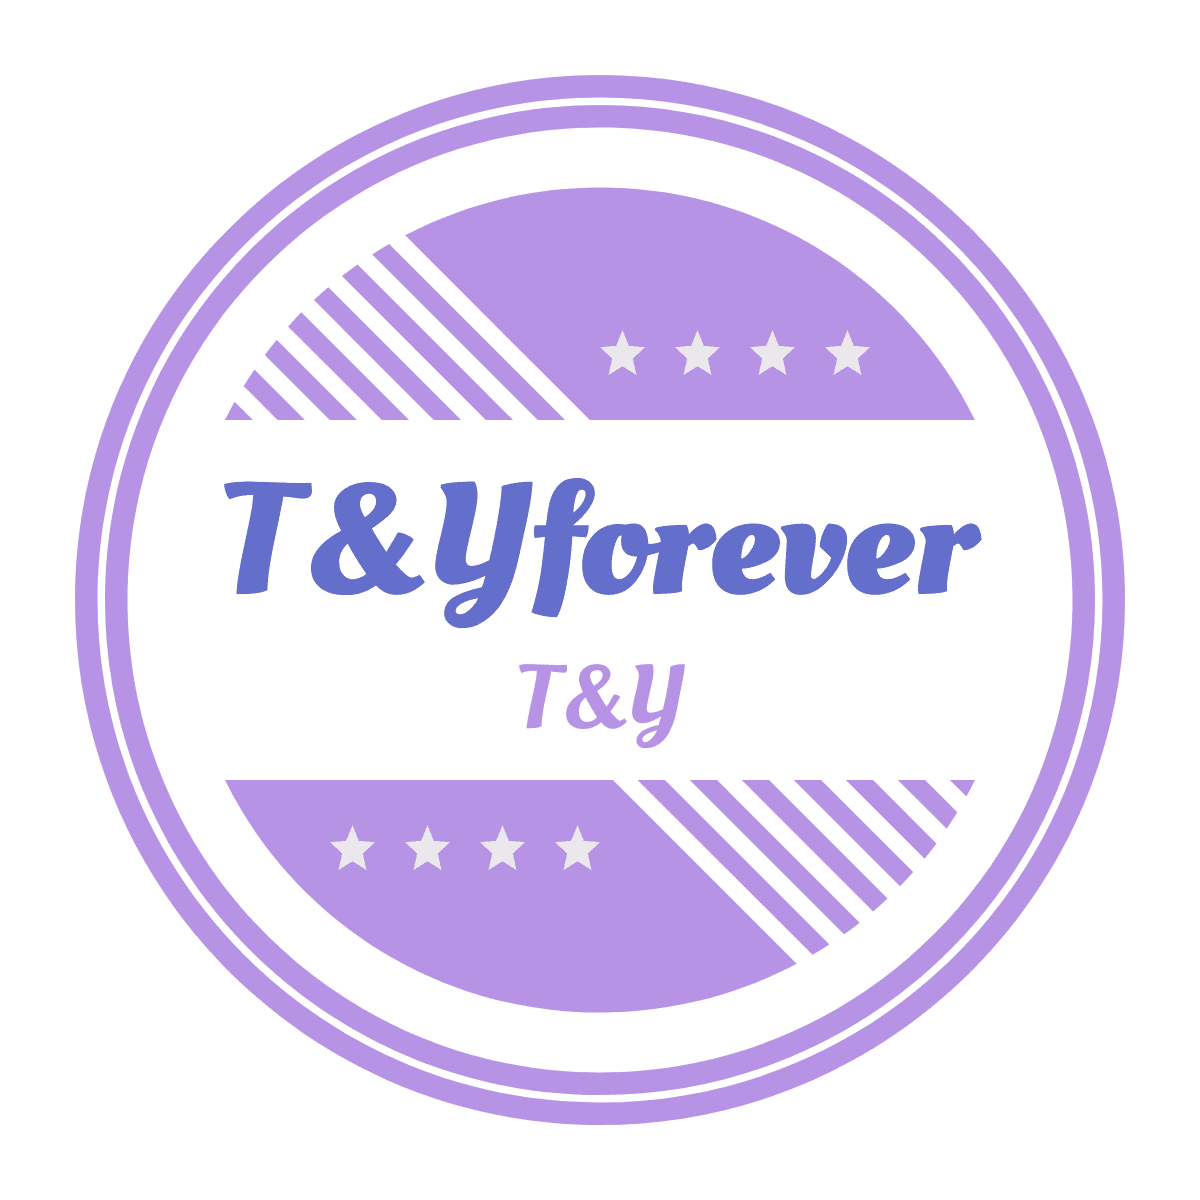 T & y Forever